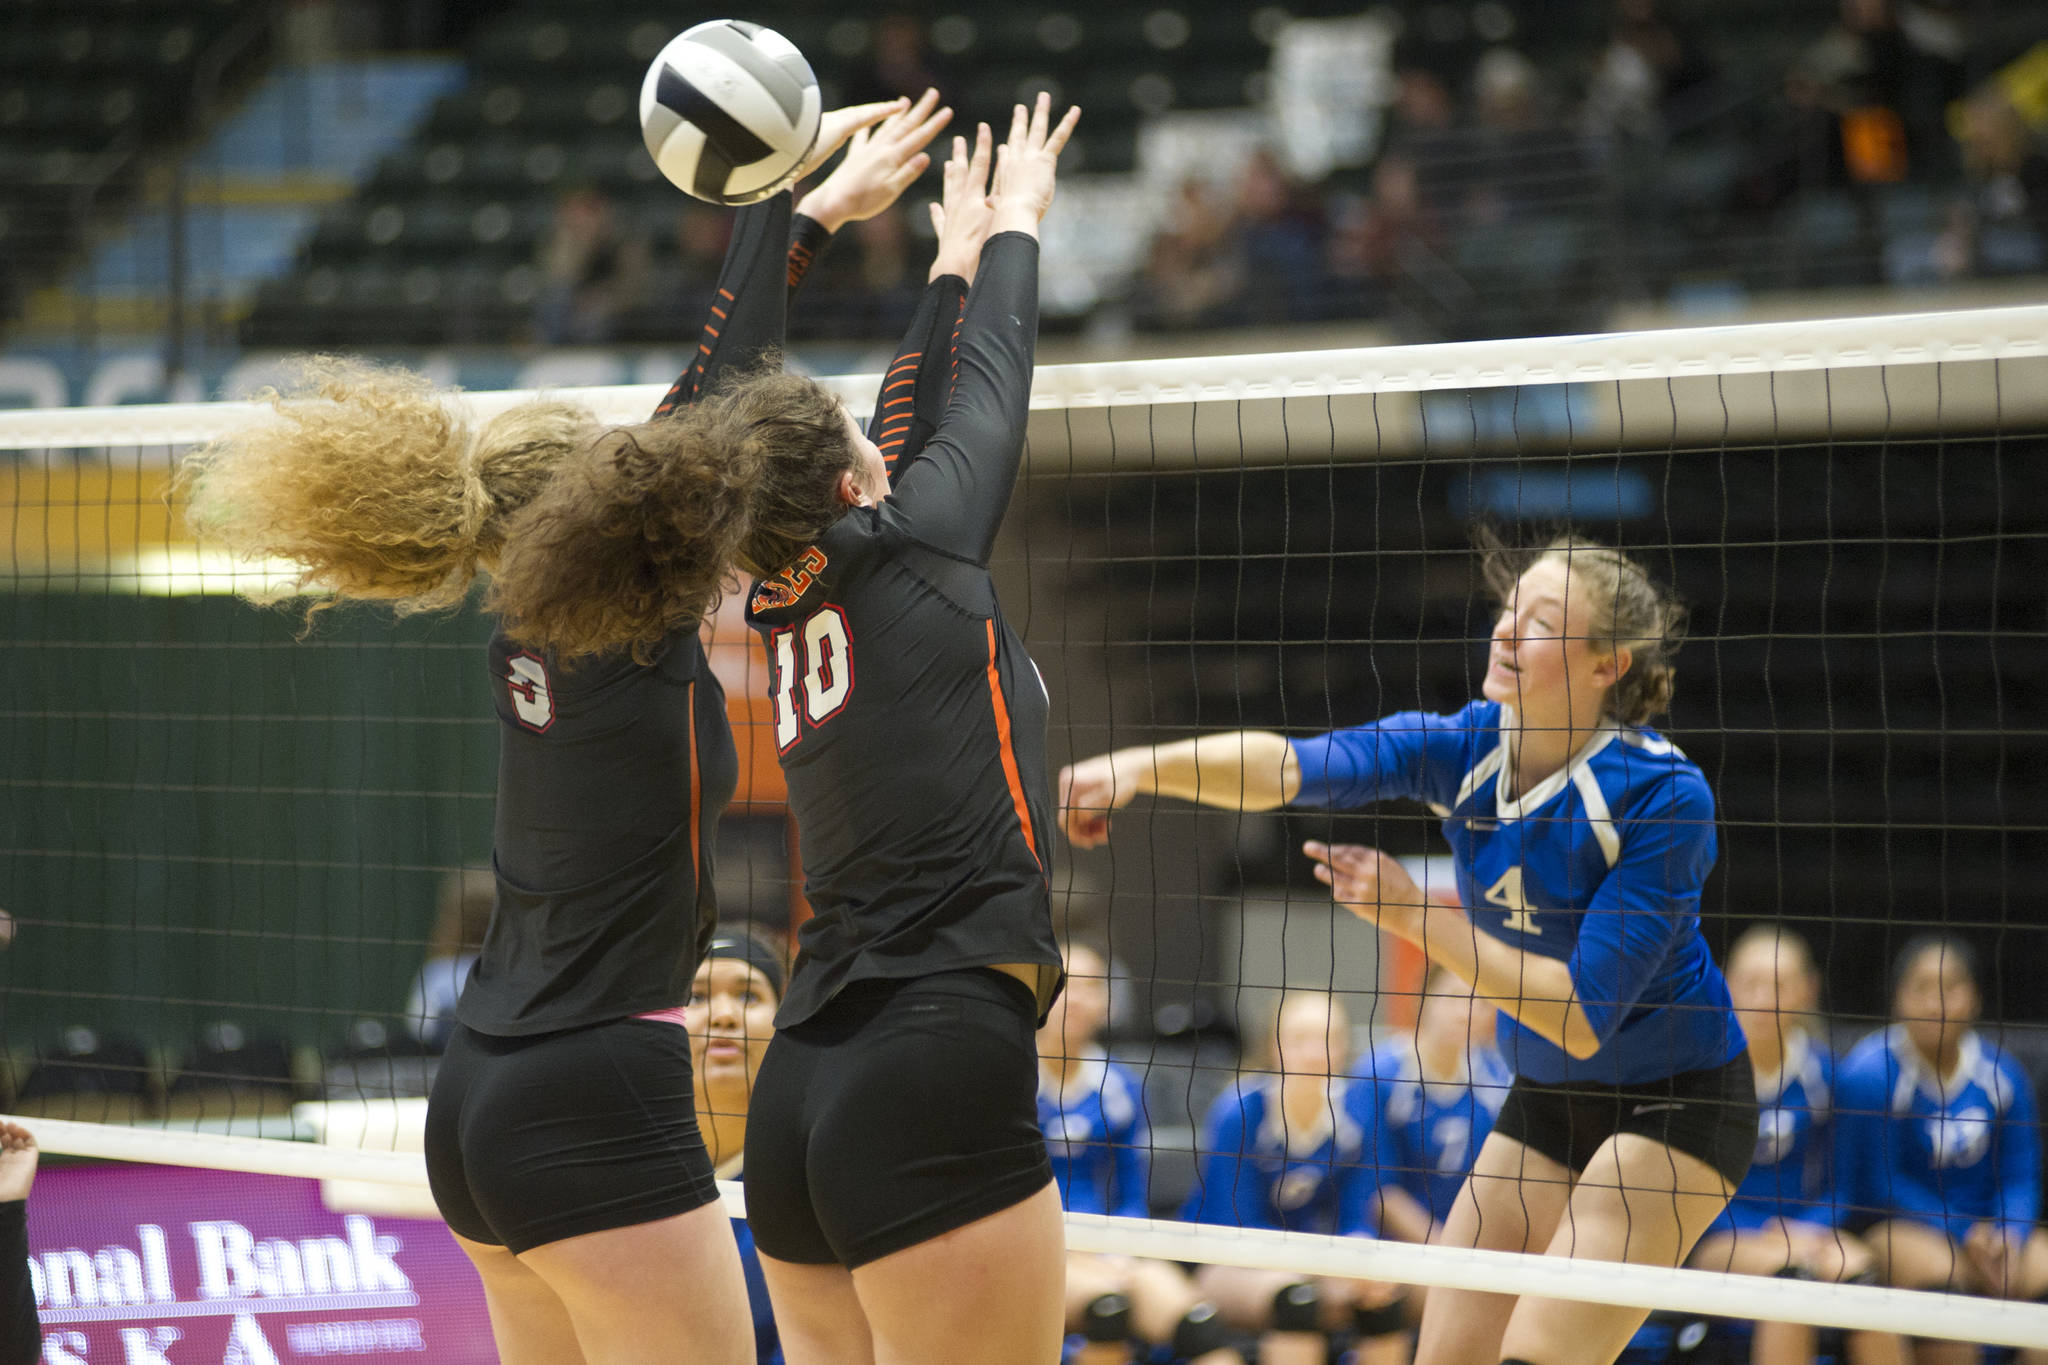 Thunder Mountain High School sophomore Sophia Harvey spikes the ball in between West Anchorage’s Danika Brown, left, and Kathleen Dexter in the first round of the ASAA/First National Bank Alaska 3A/4A Volleyball State Championships on Thursday at the Alaska Airlines Center in Anchorage. (Nolin Ainsworth | Juneau Empire)